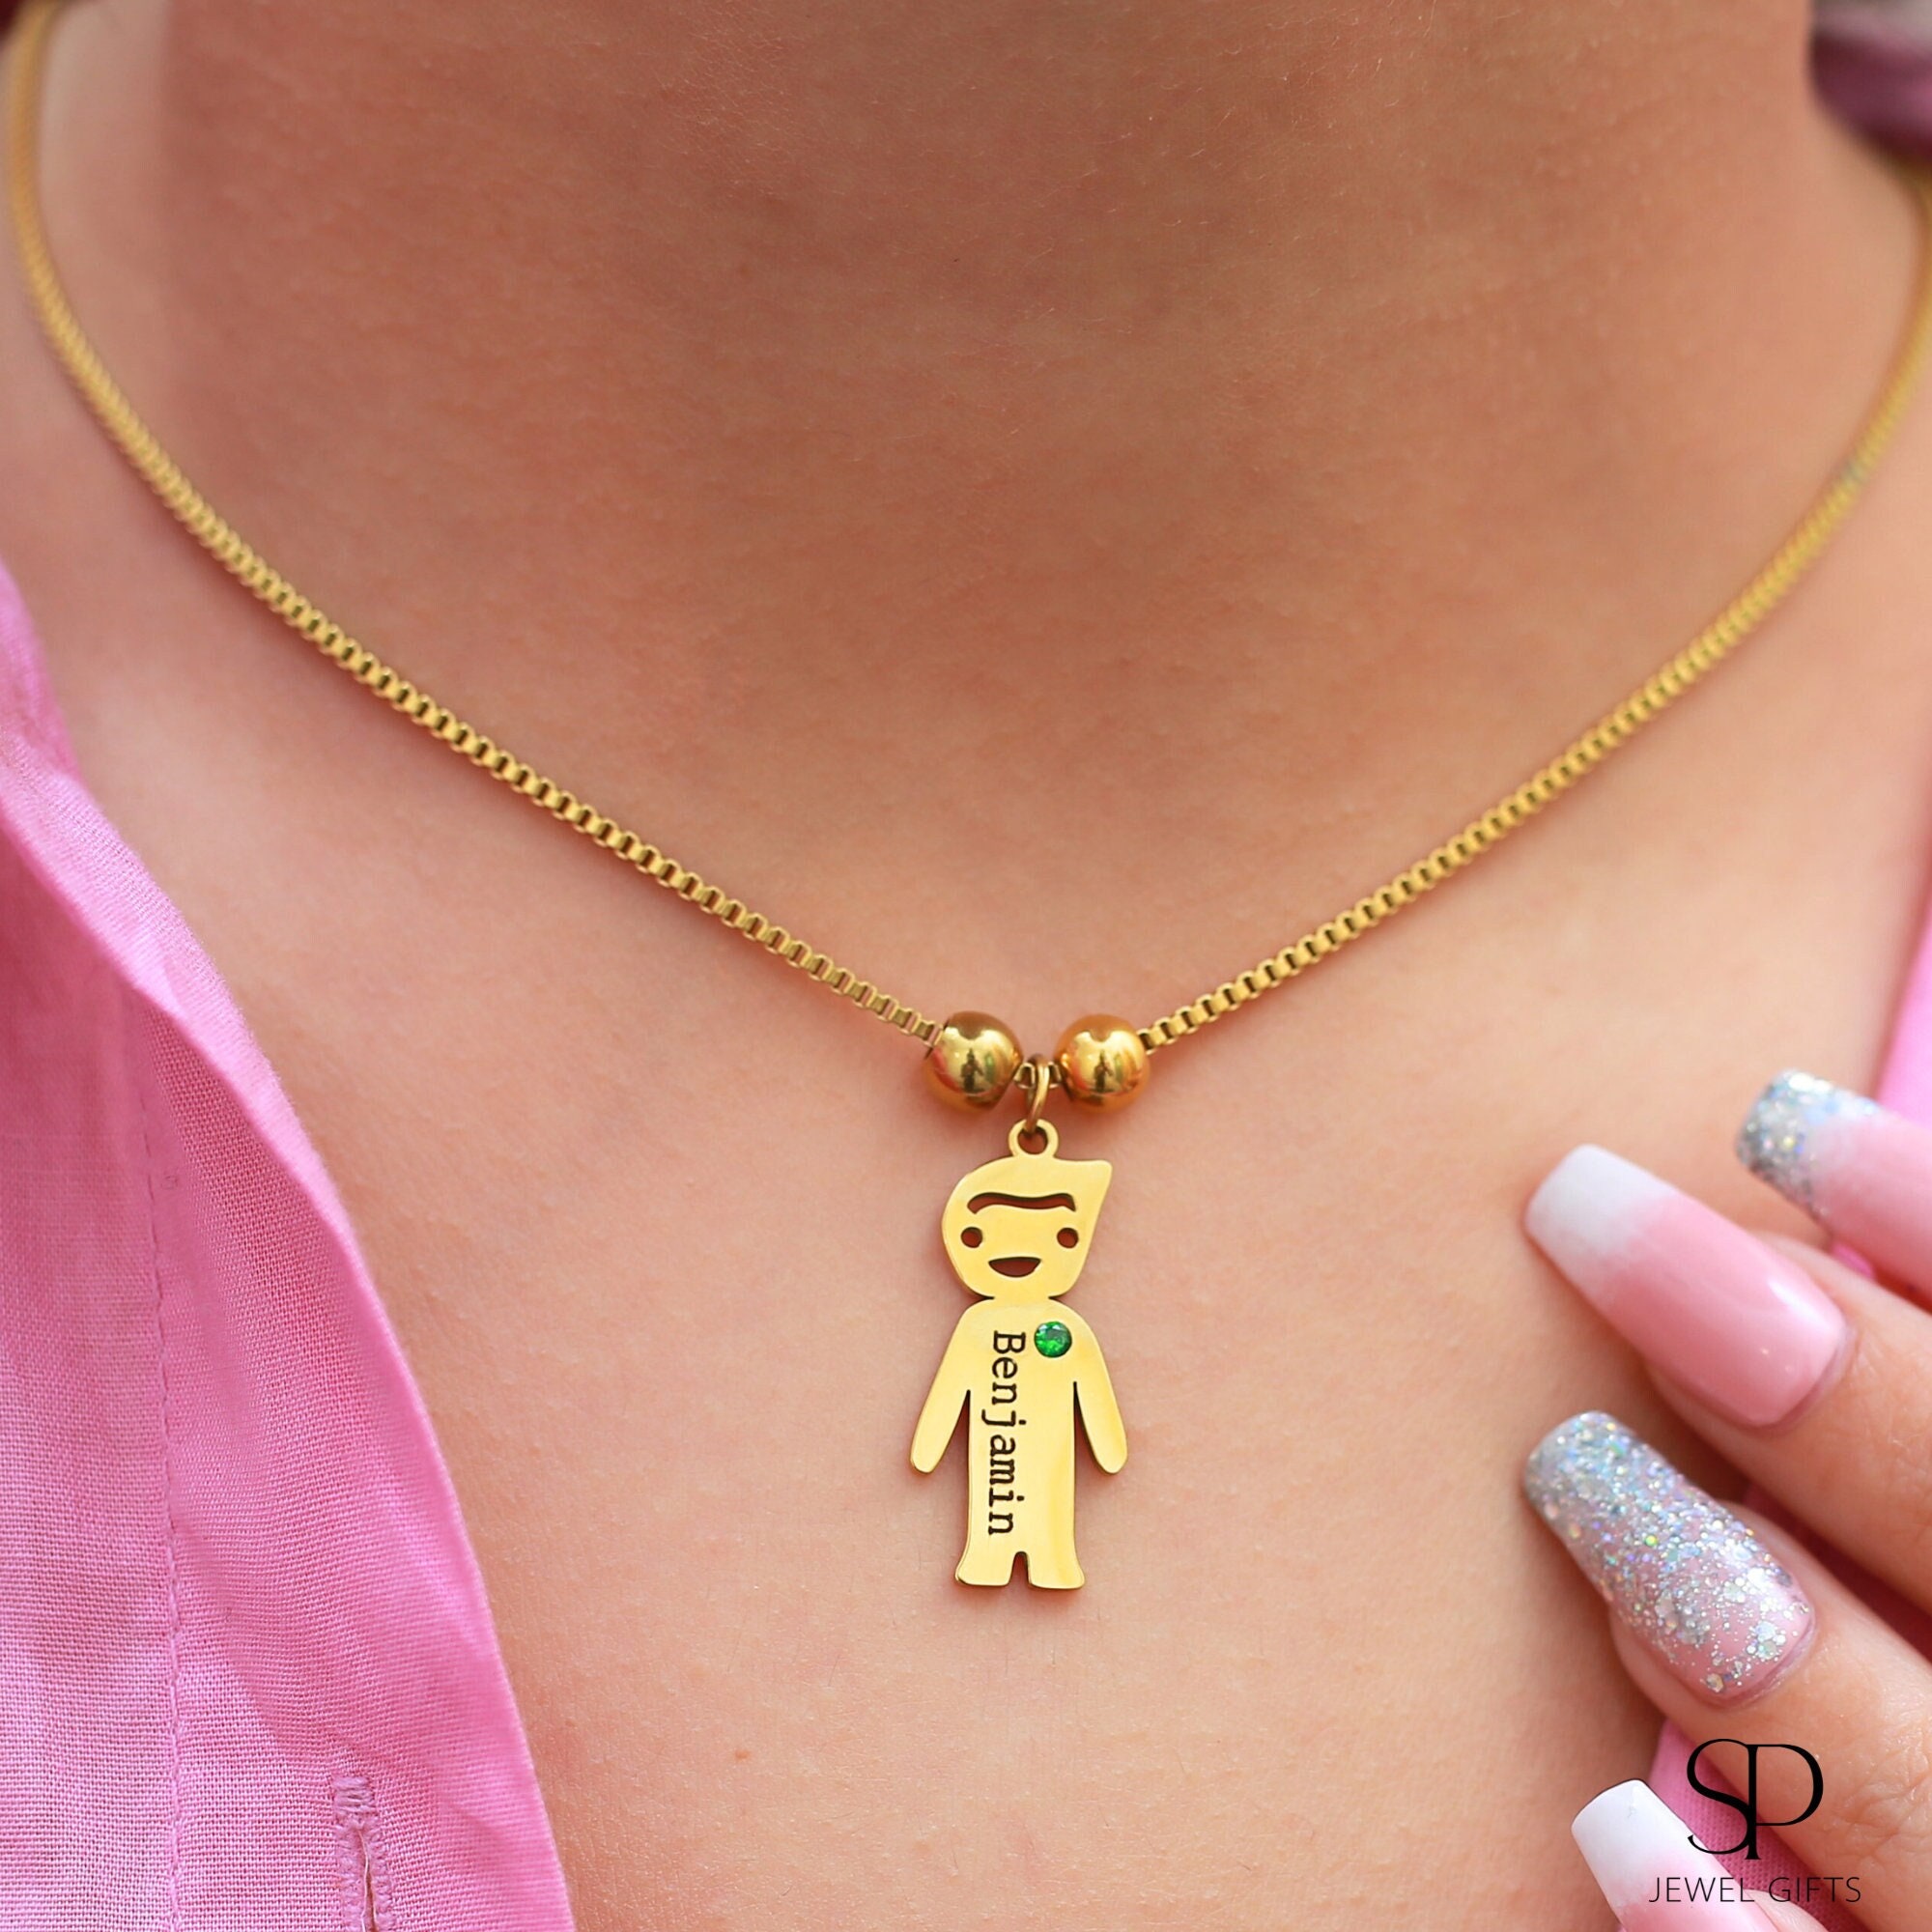 Baby Boy Disc Necklace for Mom in 18k Gold Plating over 925 Sterling Silver  | JOYAMO - Personalized Jewelry